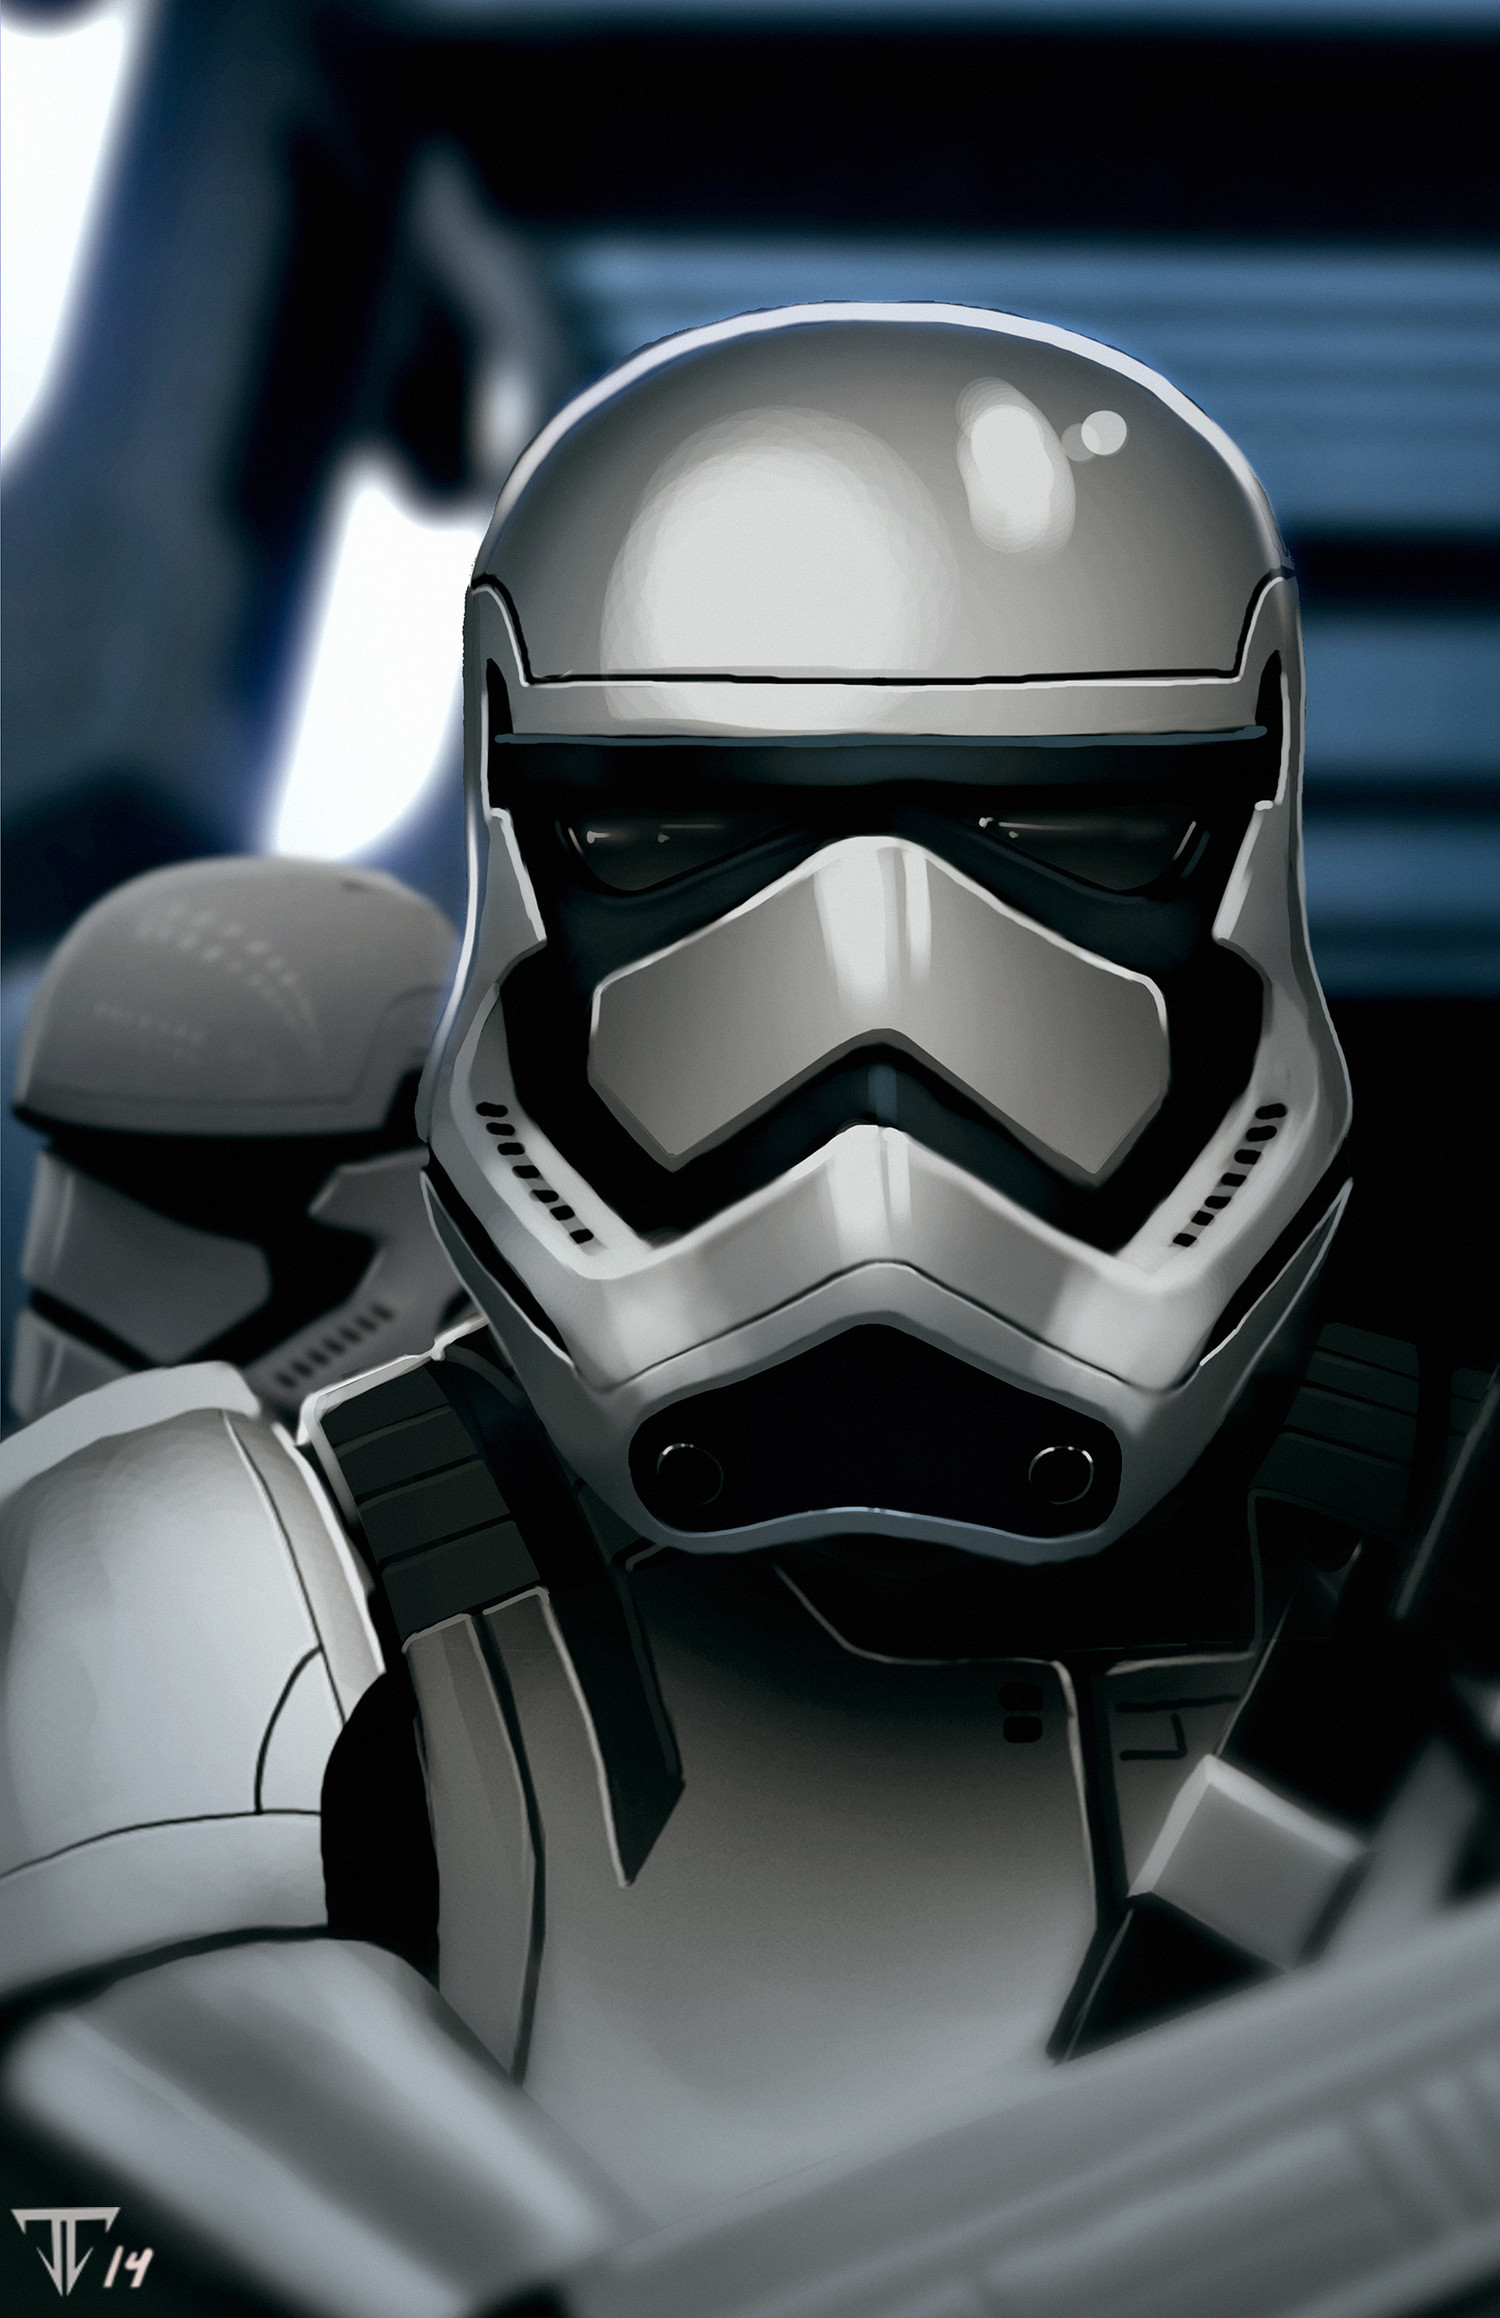 Turn the new Star Wars VII Stormtrooper Concept images into a wallpaper …